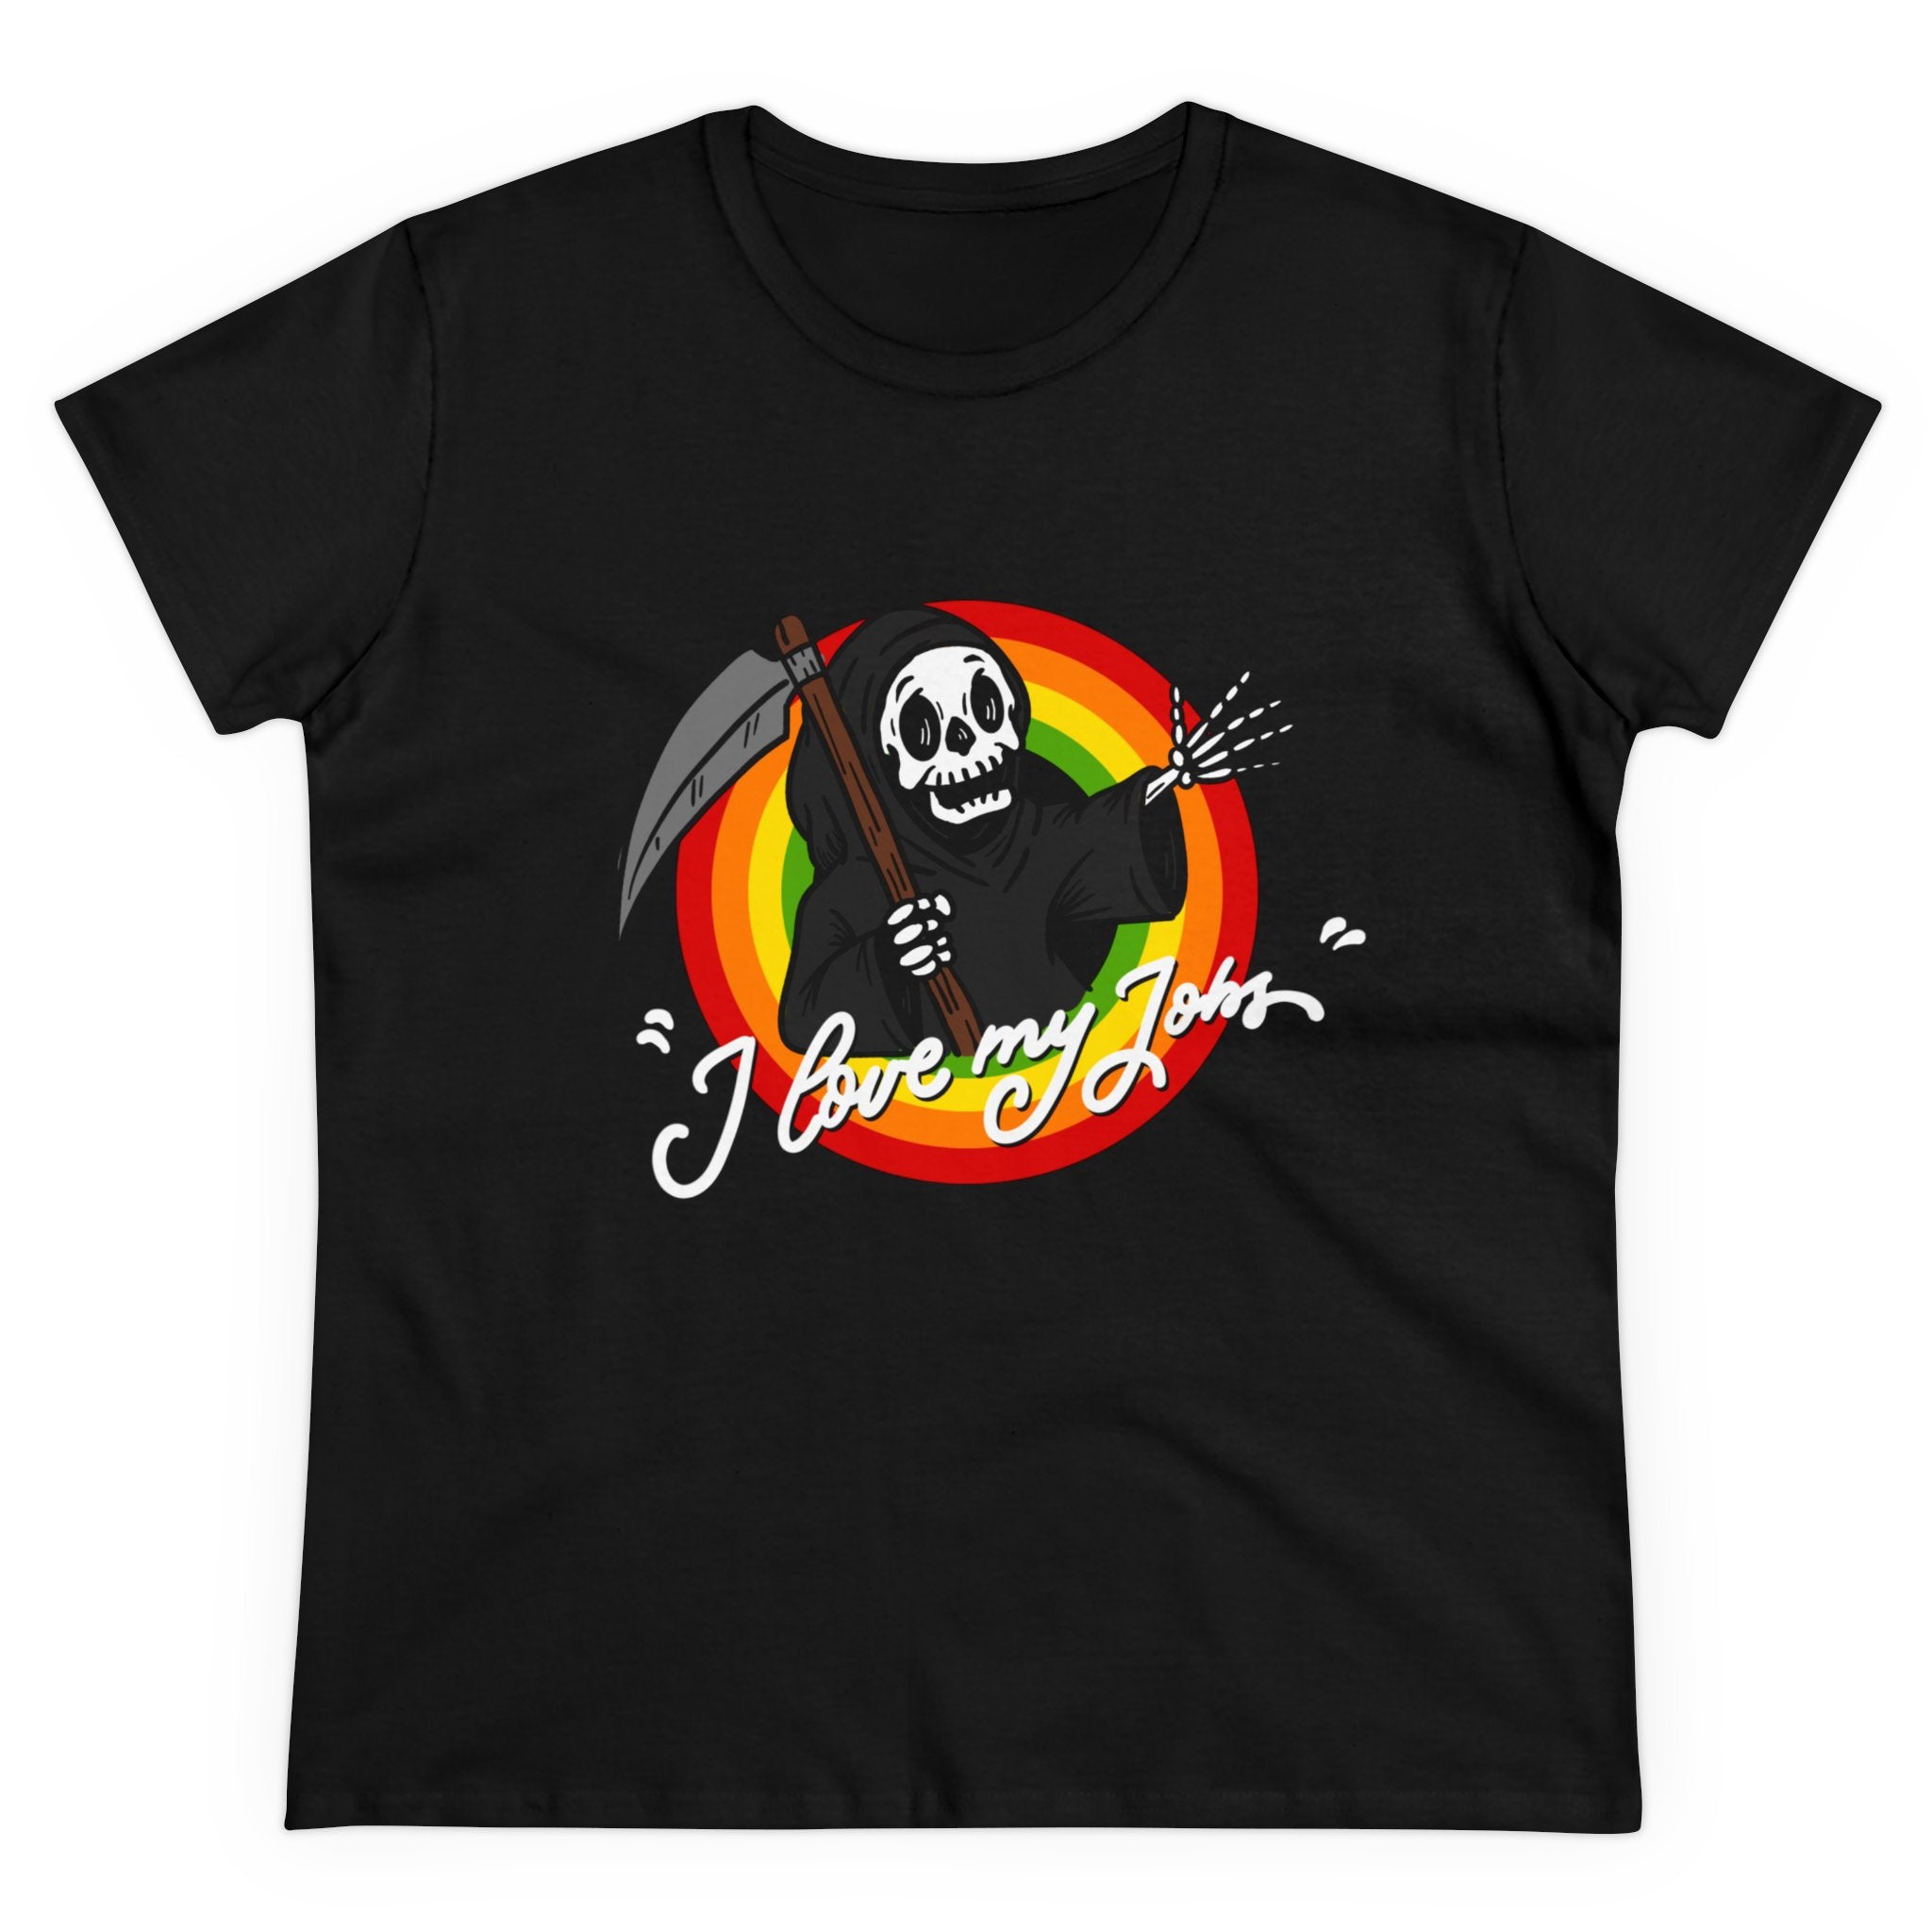 Love My Jobs - Women's Tee: This black T-shirt, crafted from soft, comfortable cotton, features a cartoon grim reaper with a scythe and rainbow background. The phrase "I love my job" appears in white cursive text.